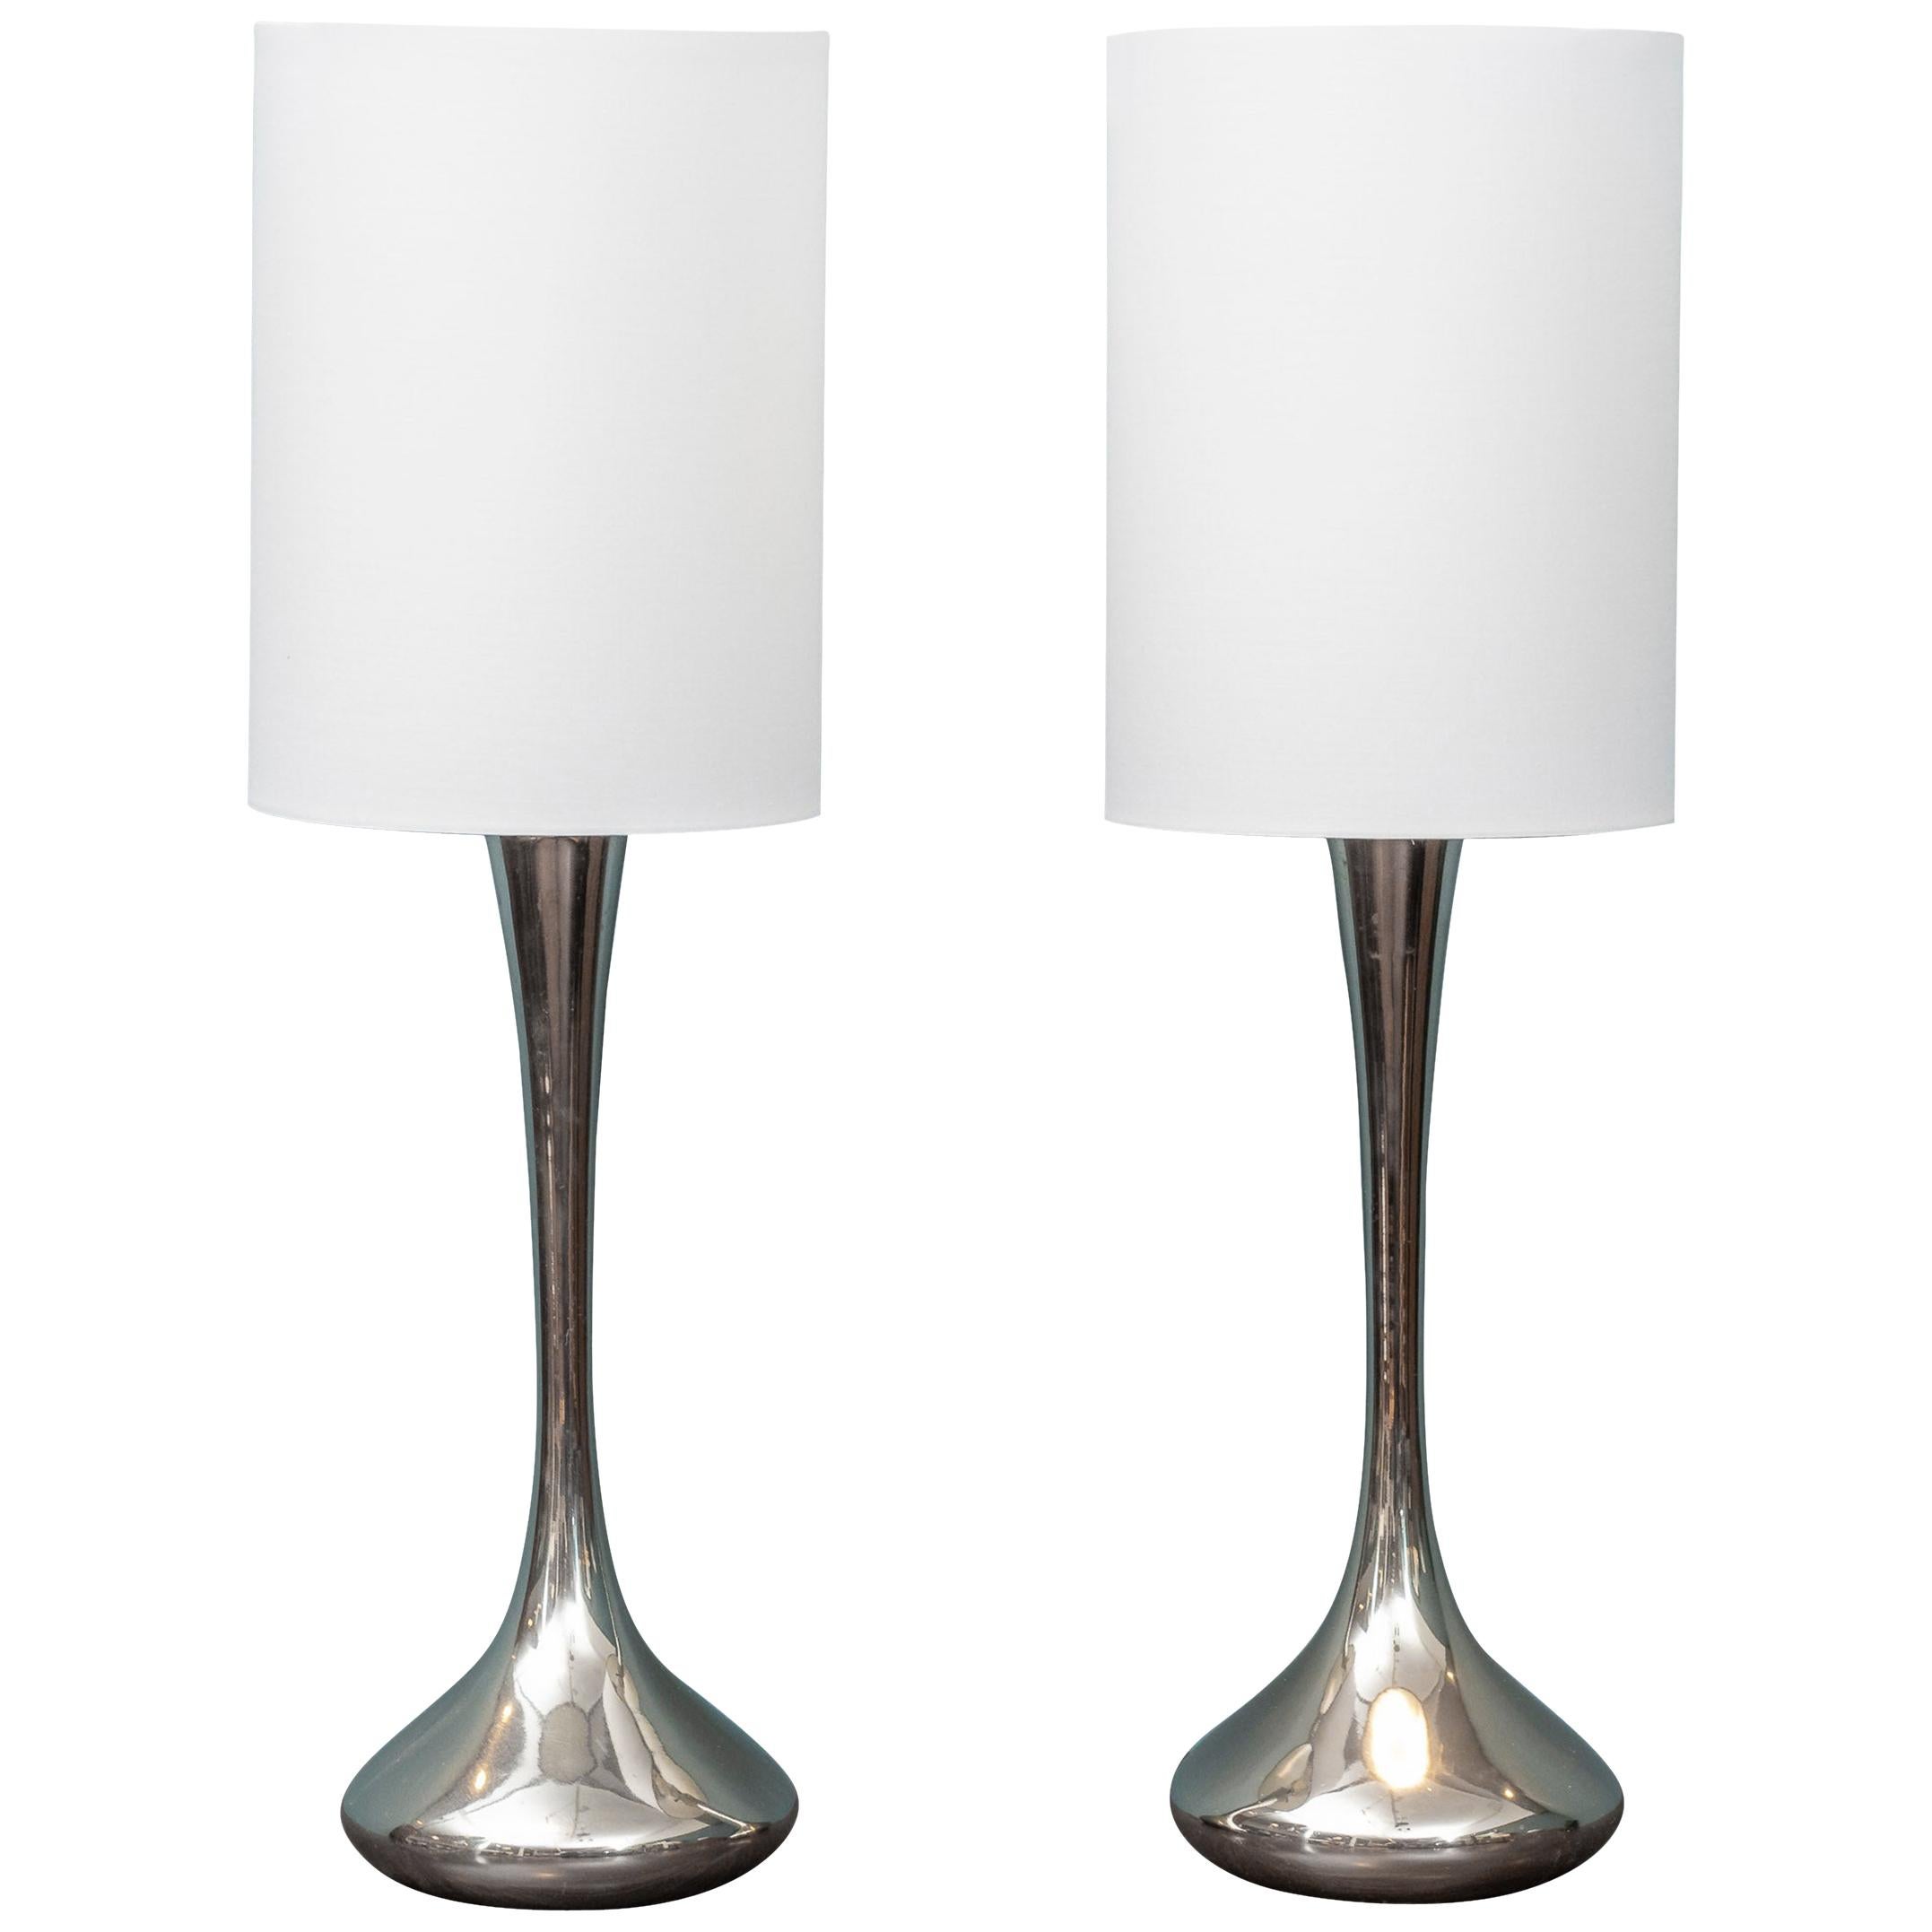 Pair of Chrome Table Lamps by Laurel